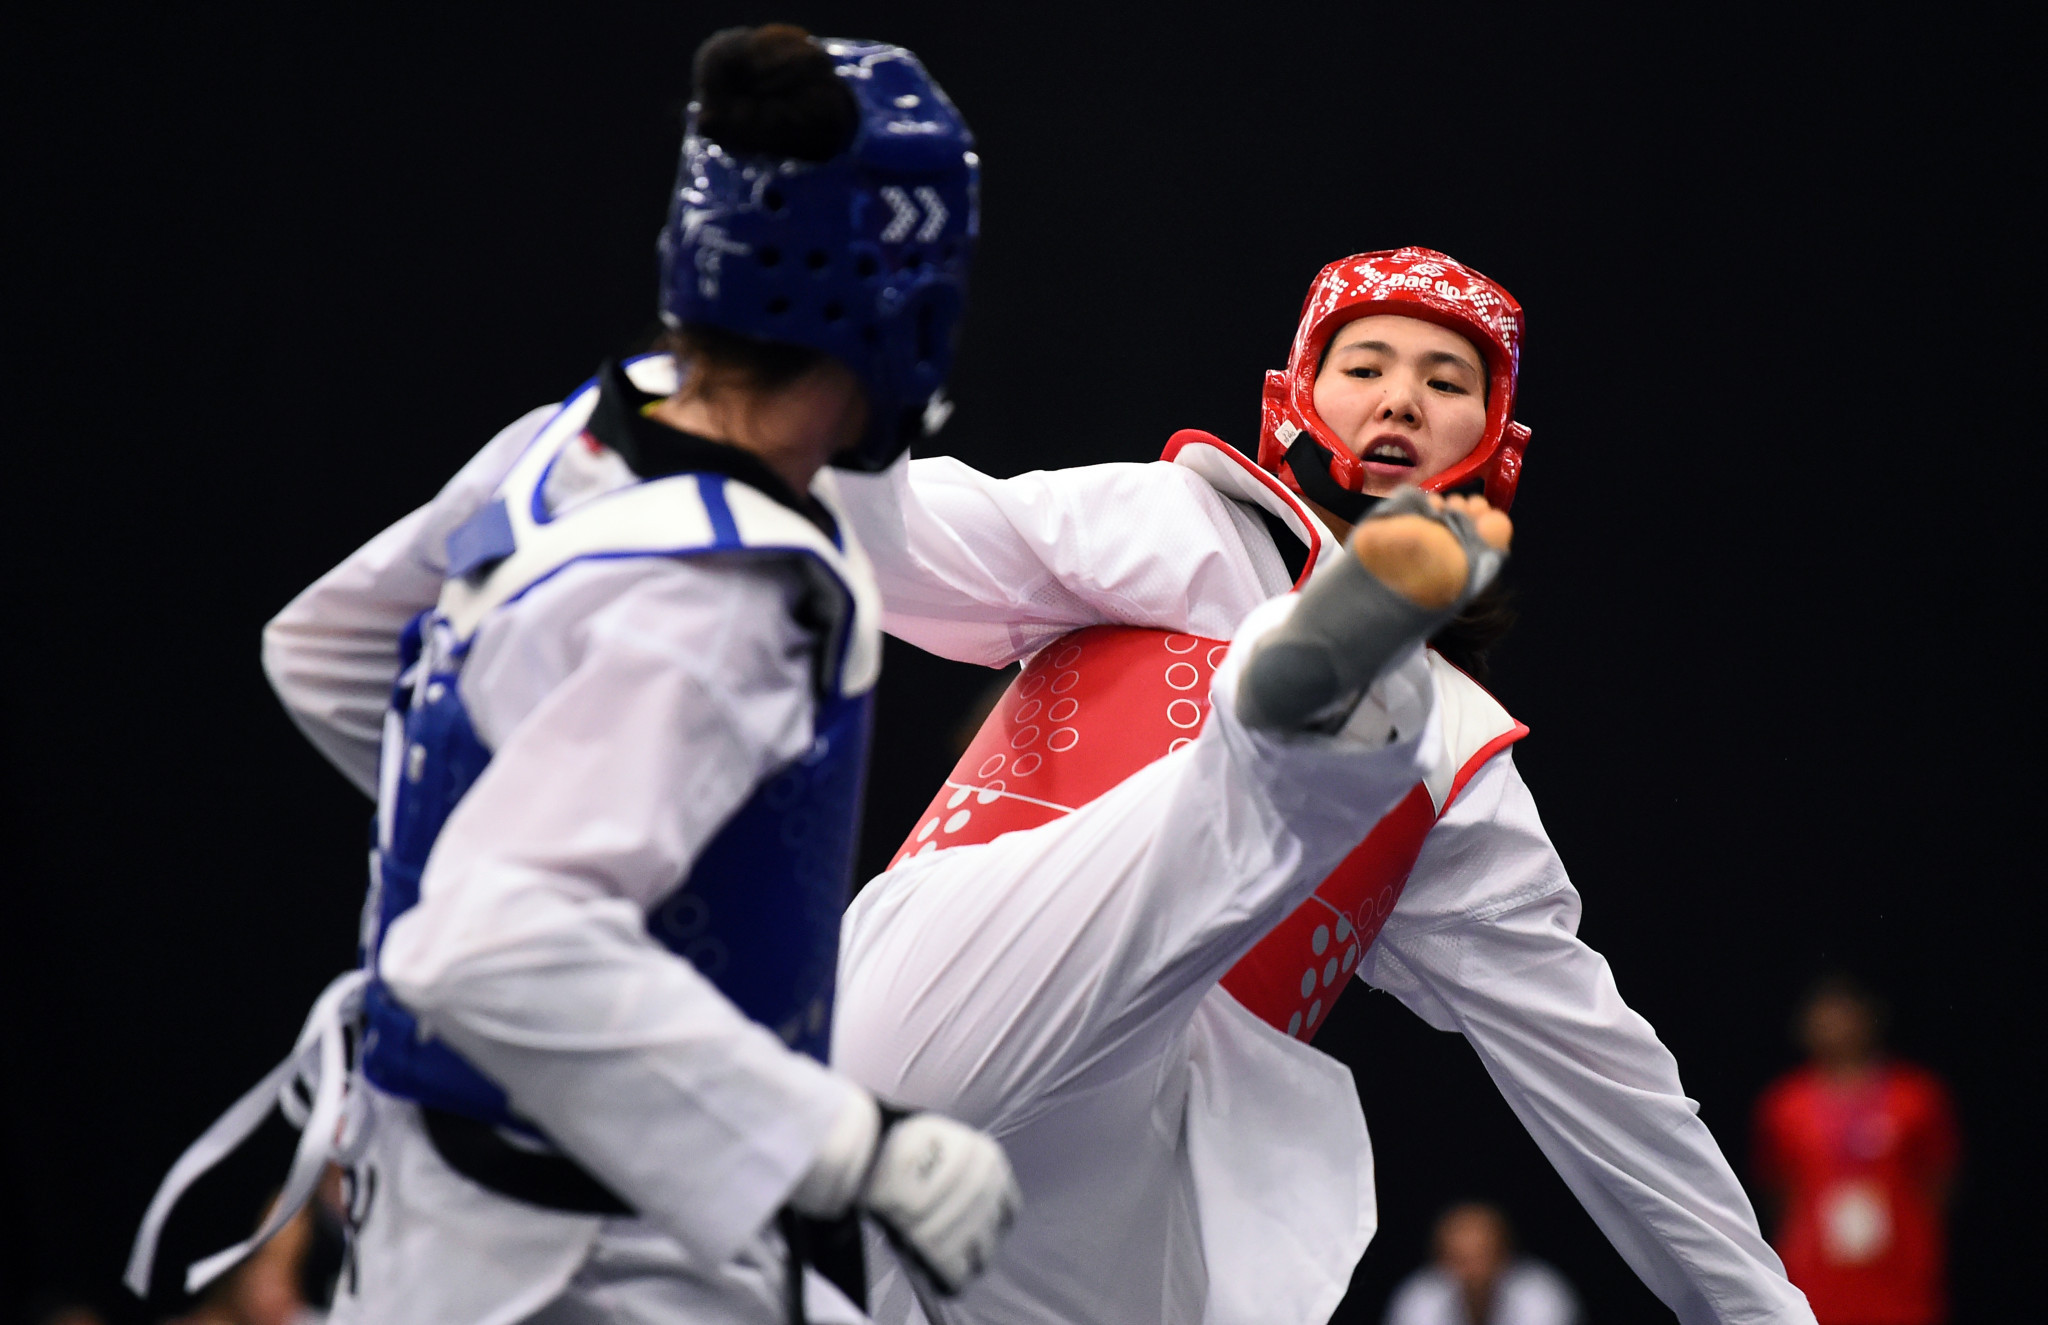 Olympic champion Shuyin Zheng had been dominating the women's over-73kg final against Bianca Walkden ©Getty Images